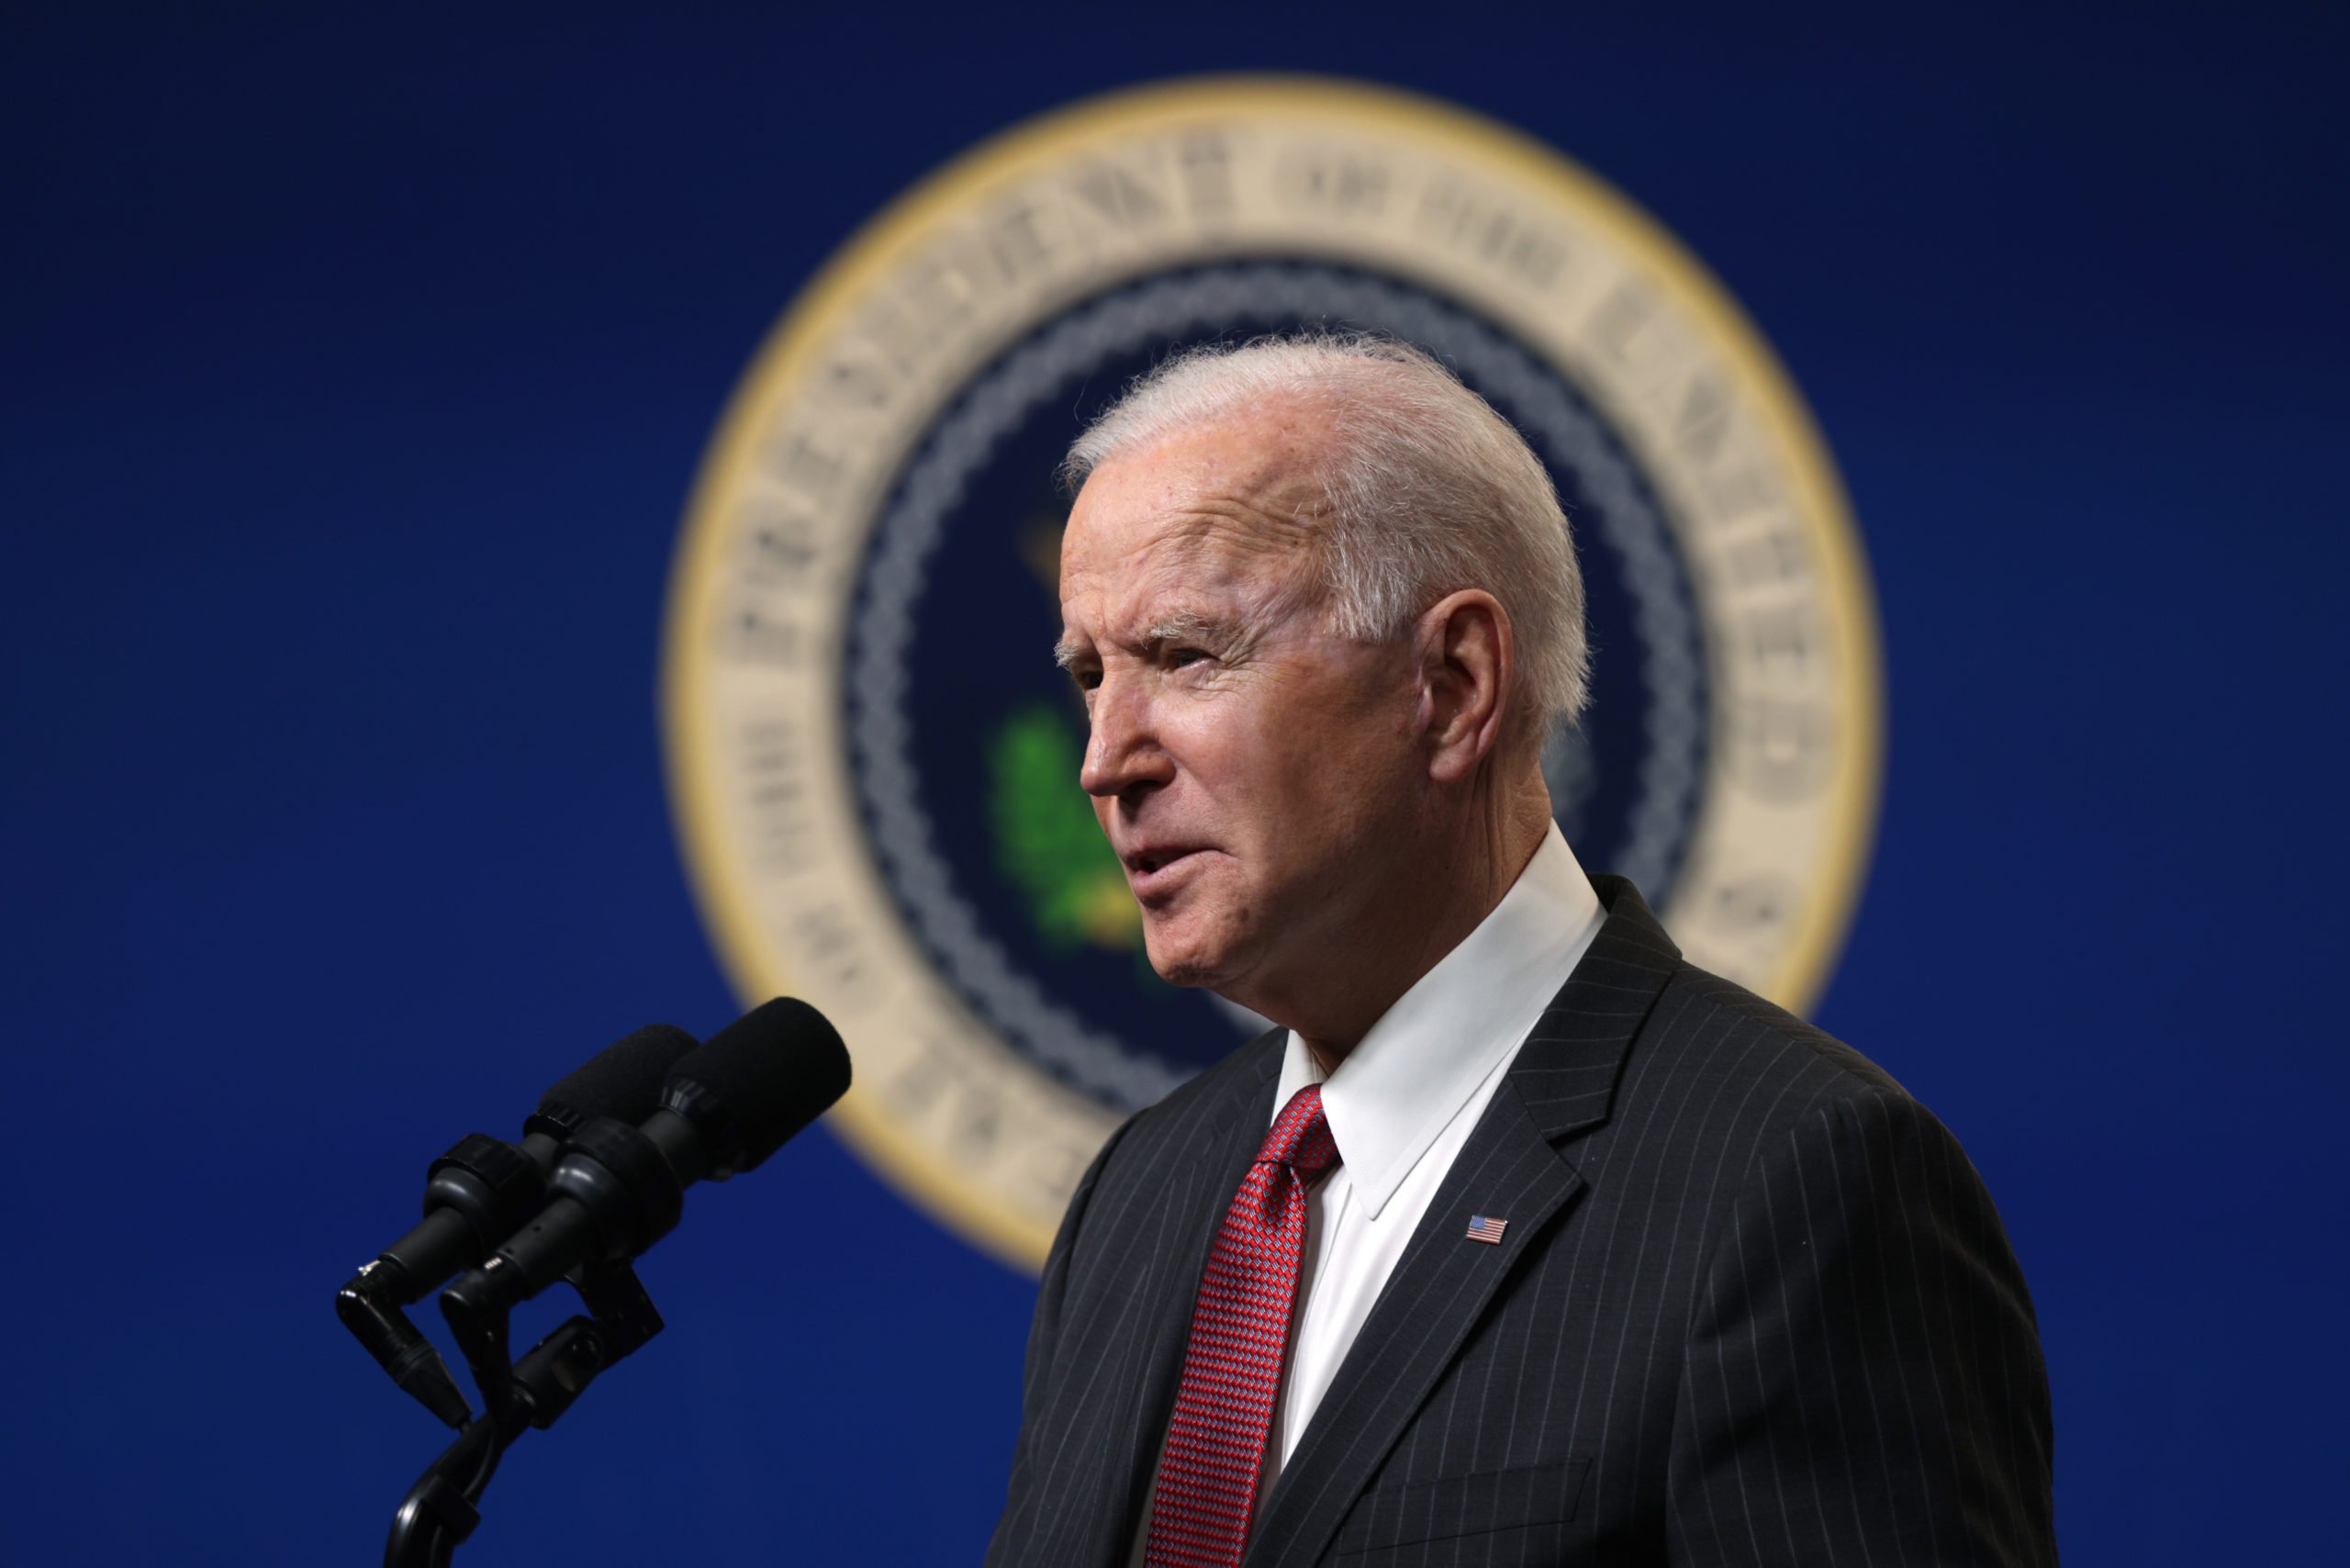 WASHINGTON, DC - FEBRUARY 10: U.S. President Joe Biden speaks as he makes a statement at the South Court Auditorium at Eisenhower Executive Building February 10, 2021 in Washington, DC. President Biden made a statement on the coup in Burma. (Photo by Alex Wong/Getty Images)